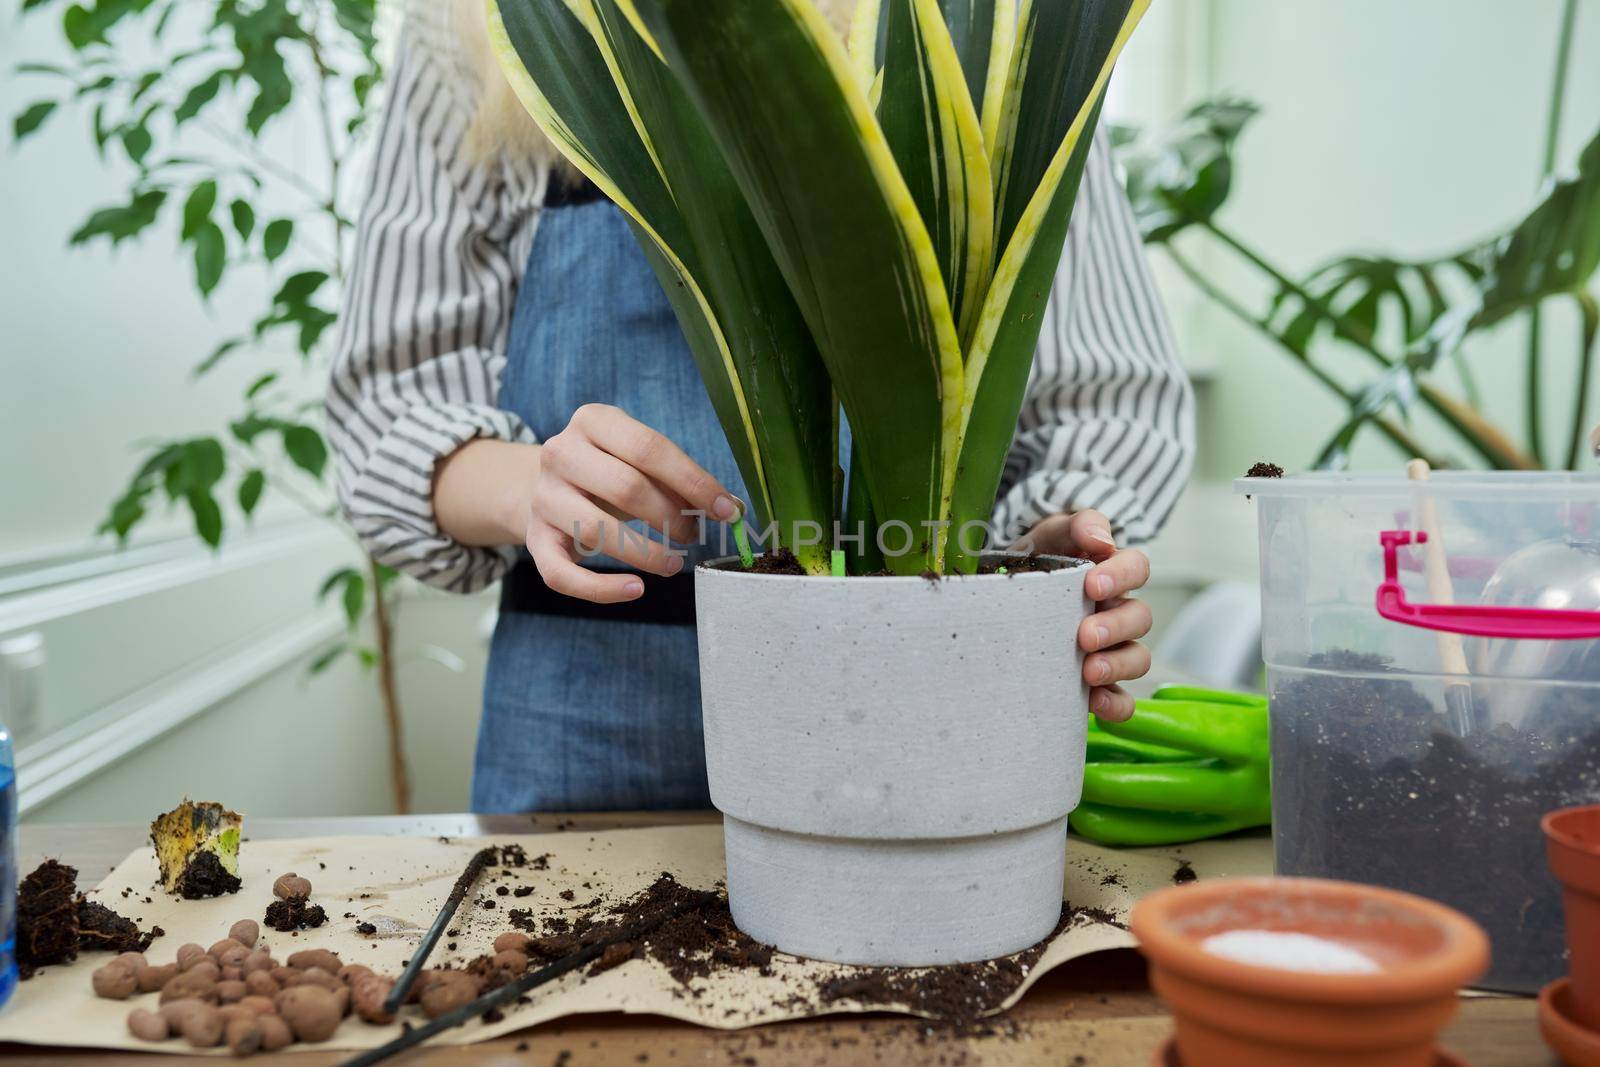 Close-up of woman's hand fertilizing potted sansevieria houseplant with fertilizer, pest repellent in form of sticks. Hobbies, leisure, caring for green pets, trends, gardening at home, garden inside